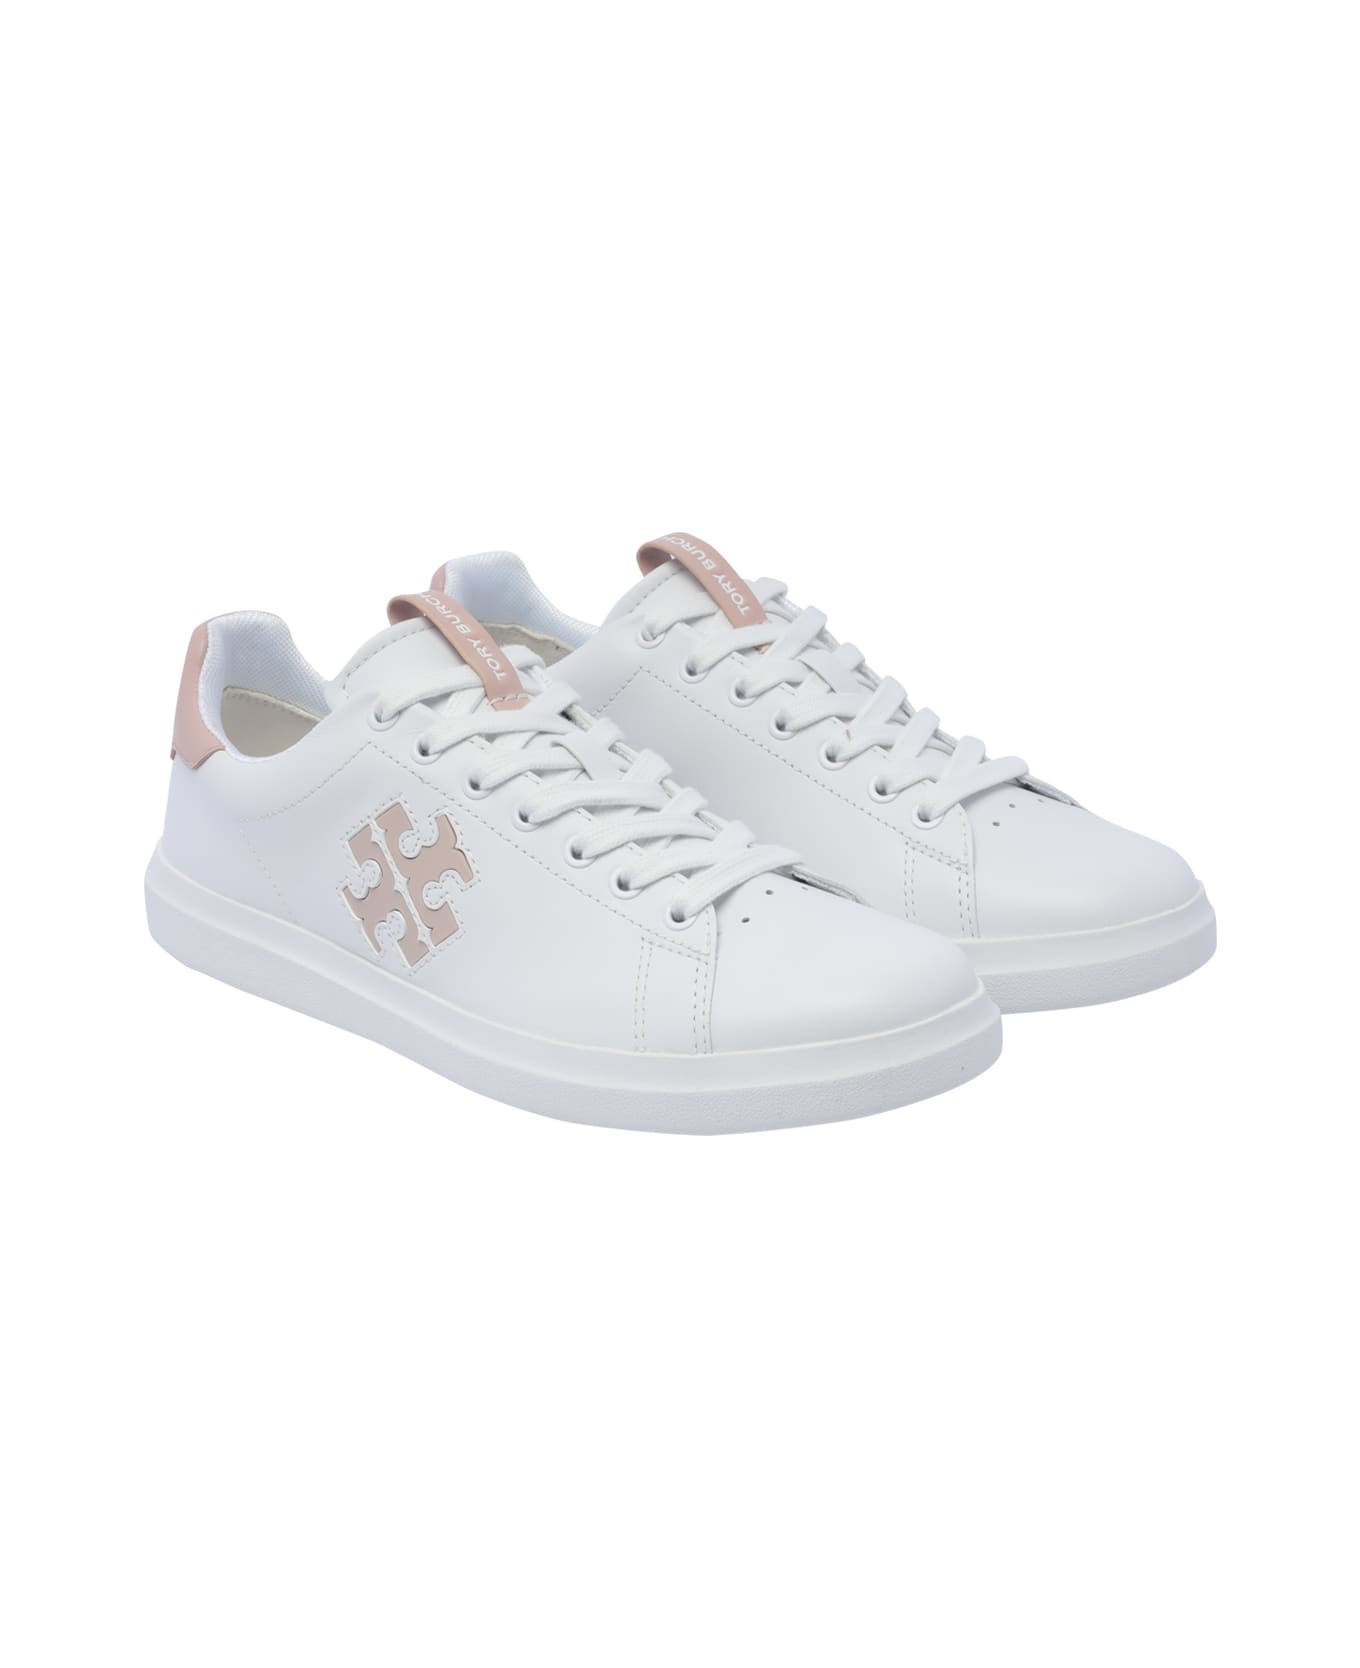 Tory Burch Good Luck Trainer Sneakers - White